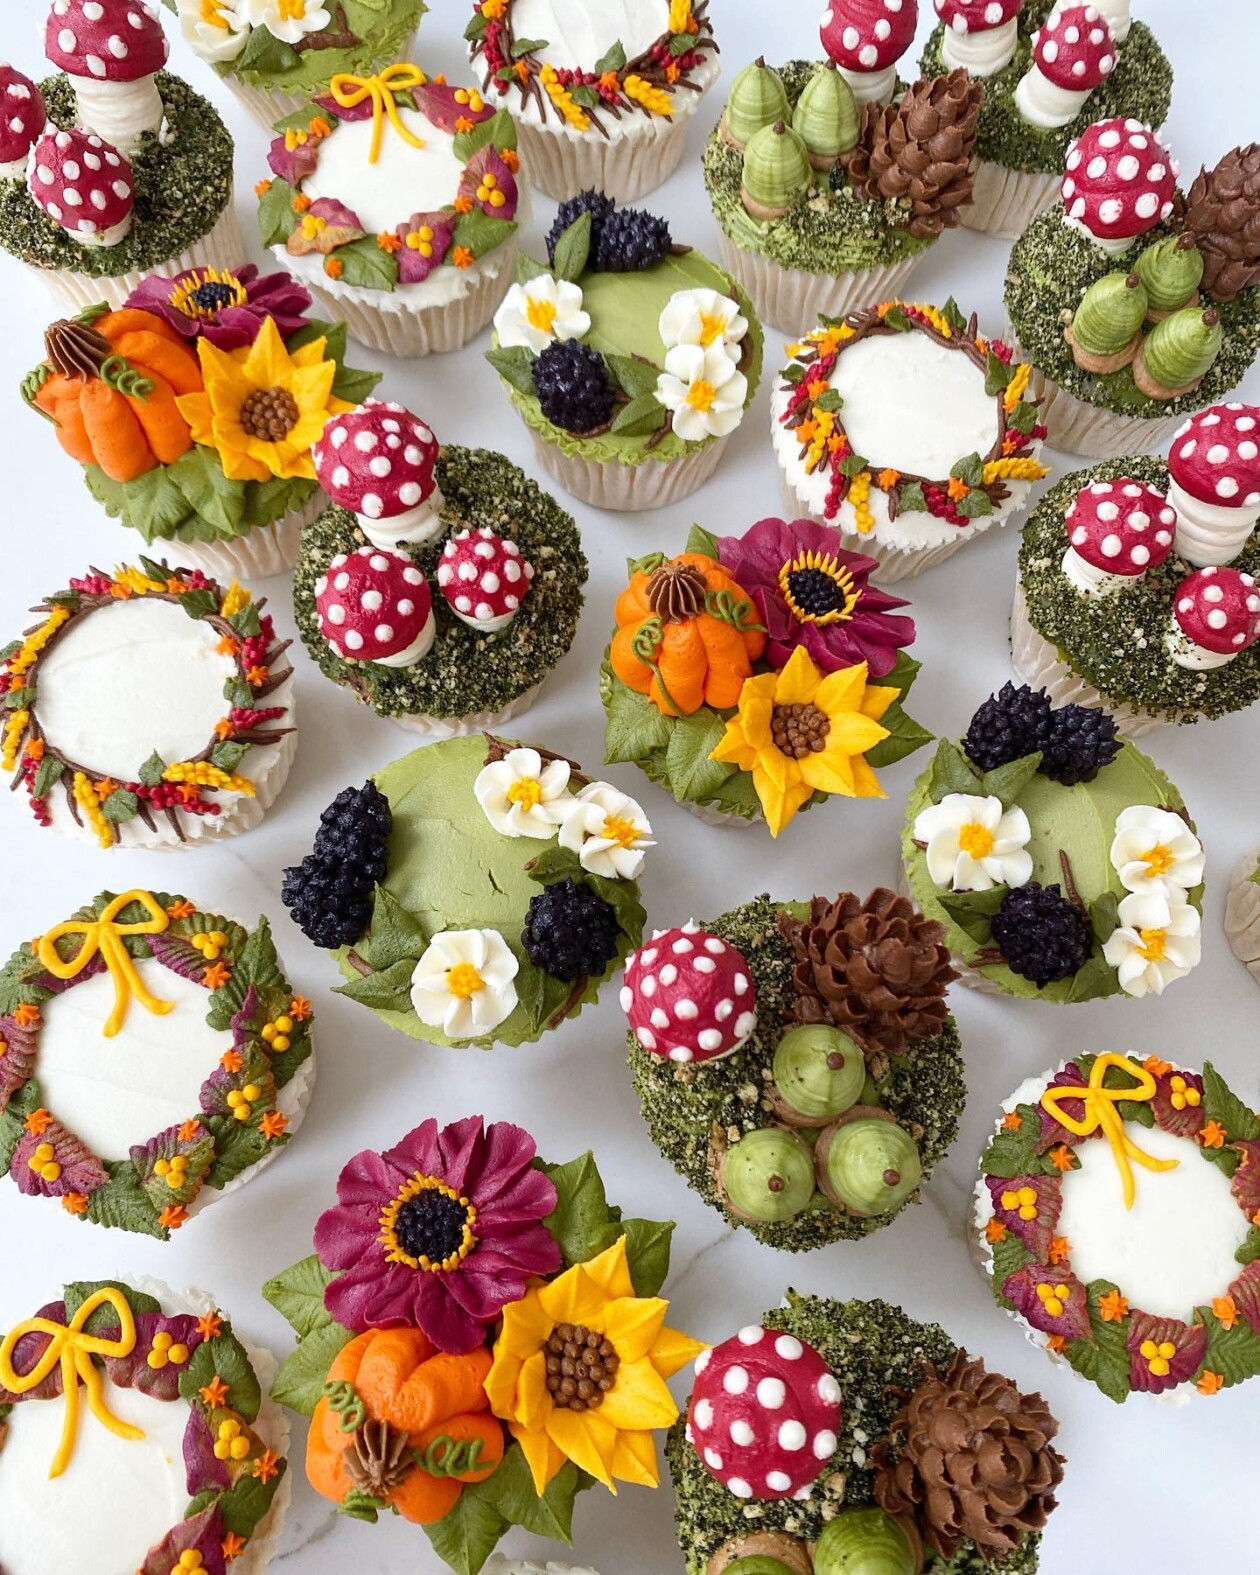 Gorgeous Cupcakes Decorated With Buttercream Flowers And Succulents By Kerry's Bouqcakes (8)